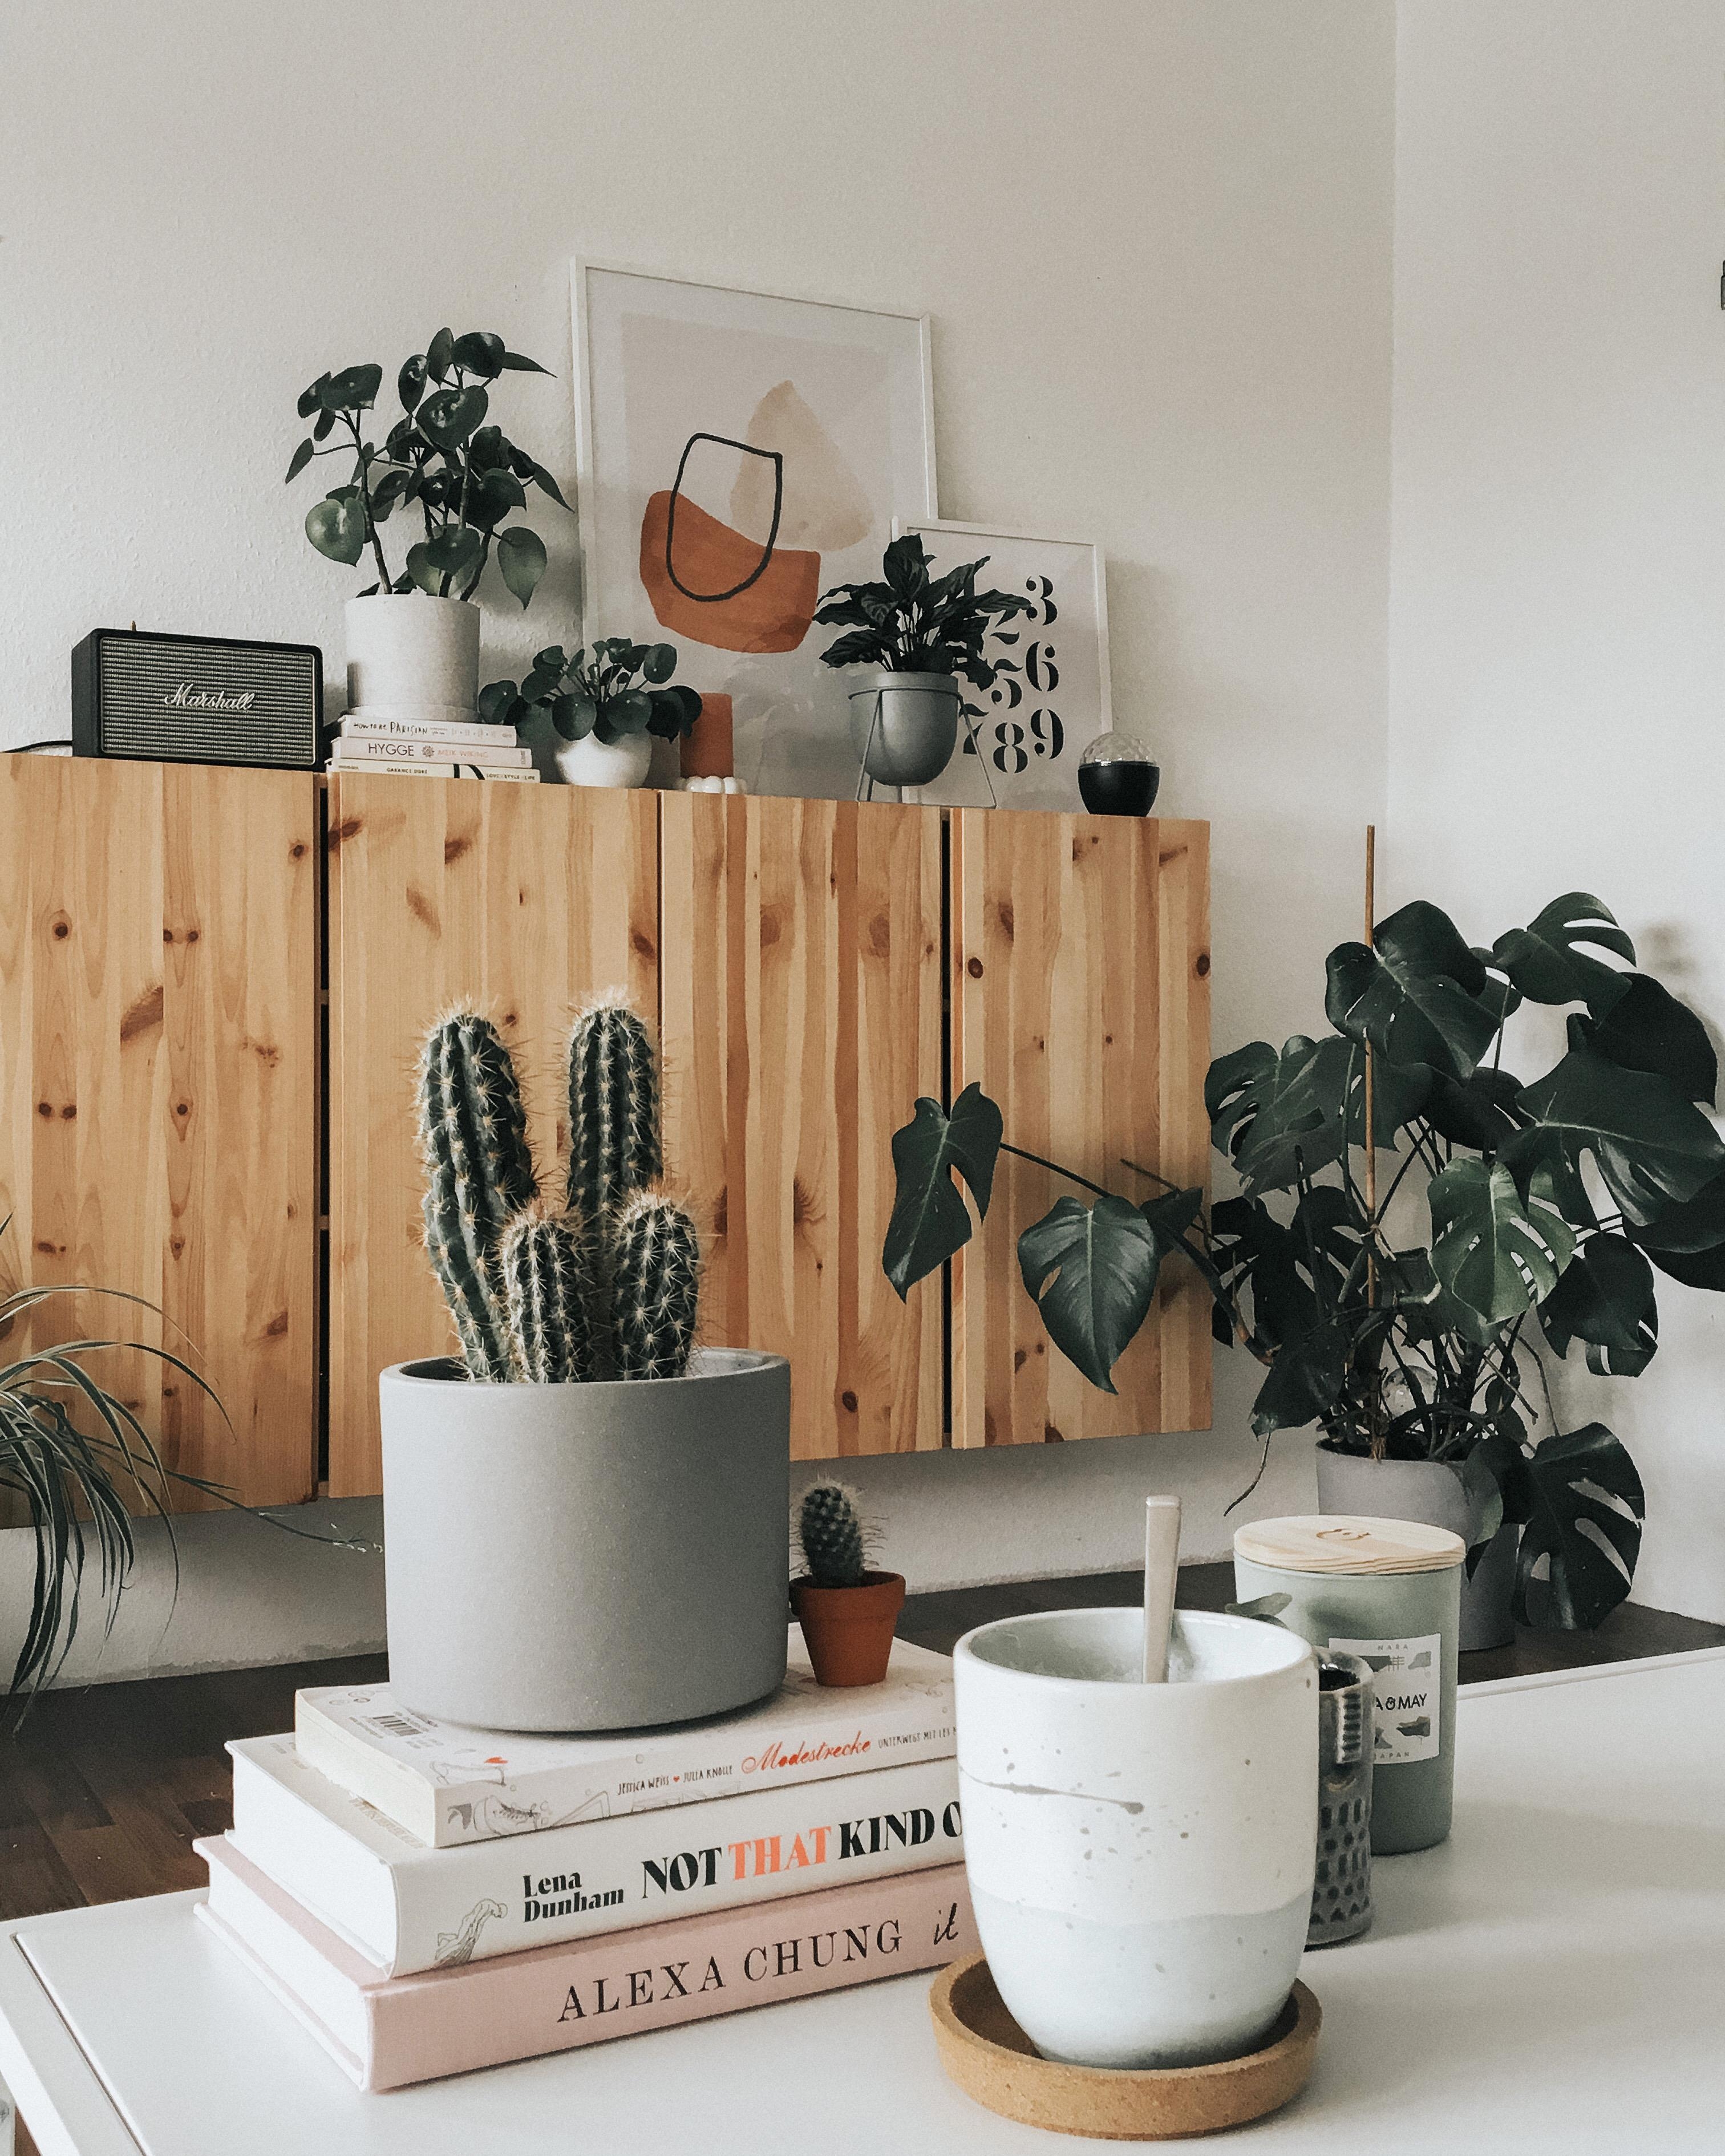 Saturday ☕️
#home #livingroom #cactus #plants #hygge #inspo #weekend #couchstyle